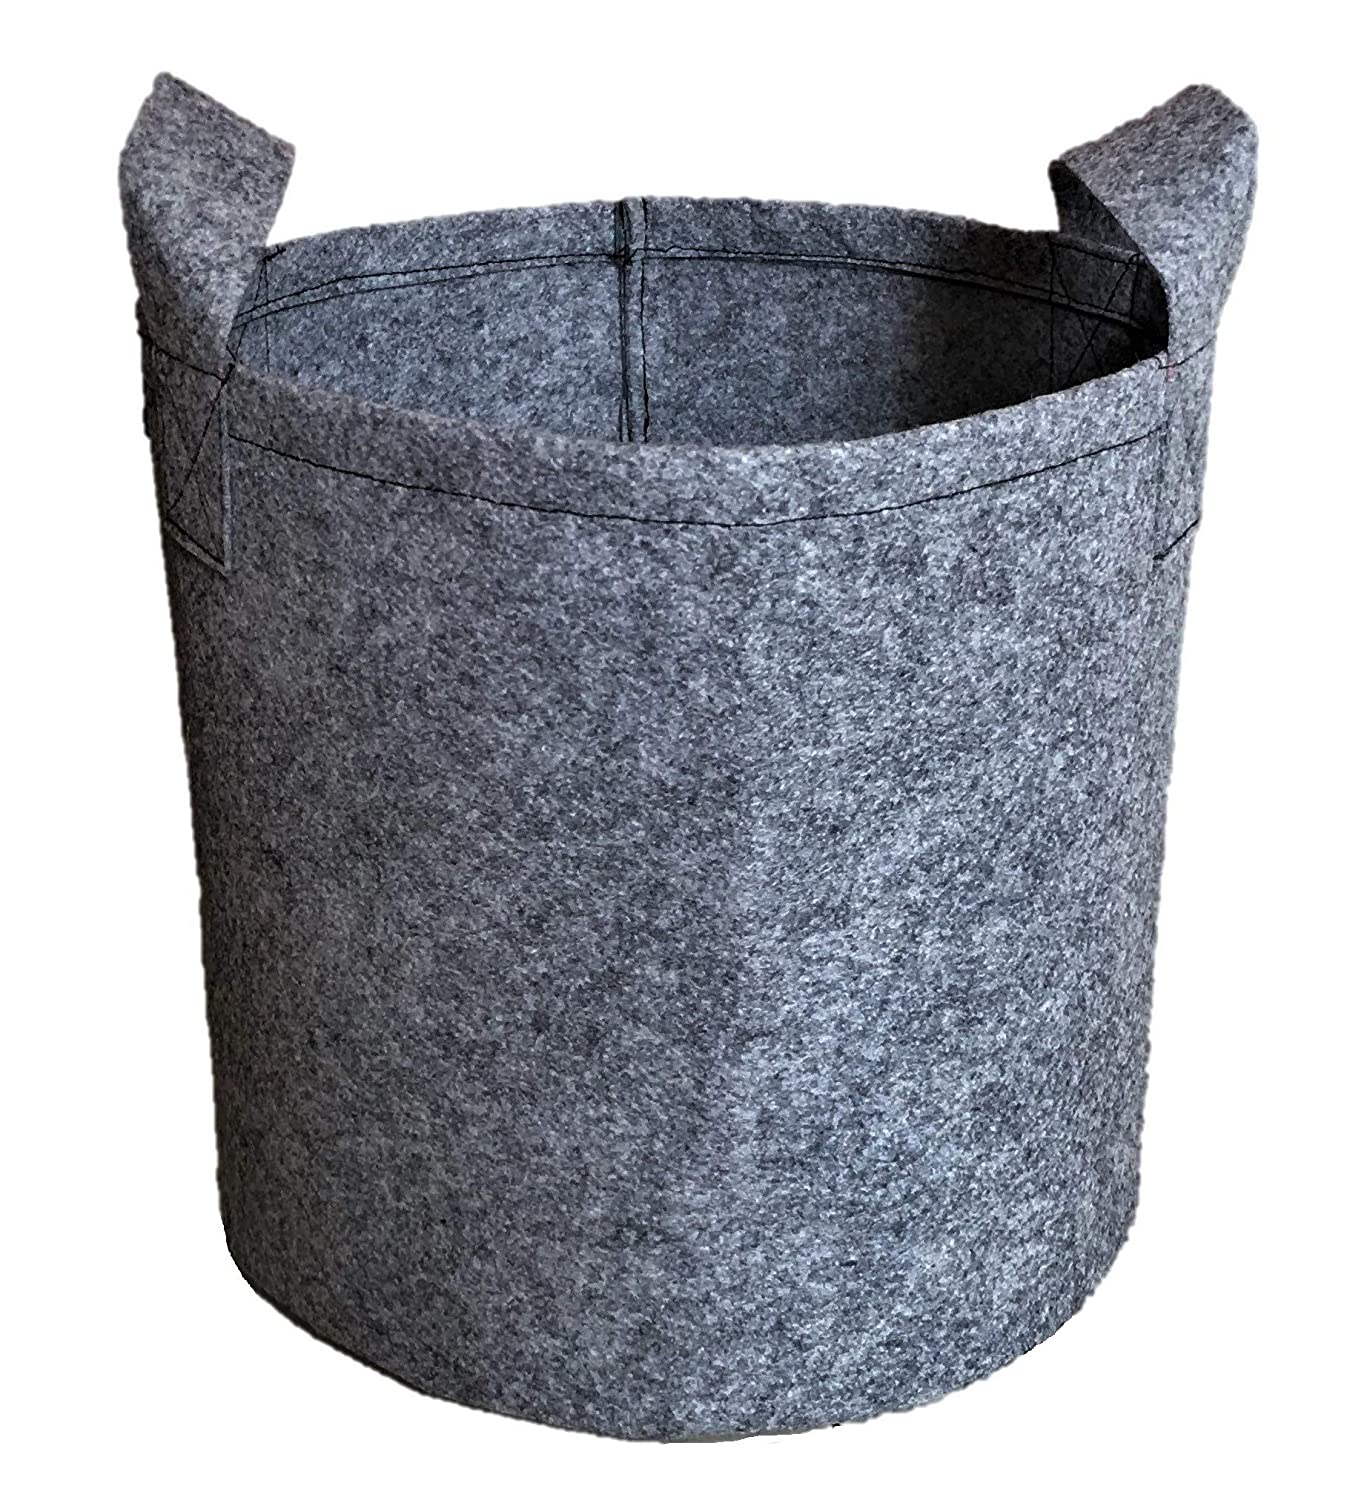 Oxypot Breathable Geo Fabric Grow Bag (12 x 12 Inches, Grey)- Pack of 5